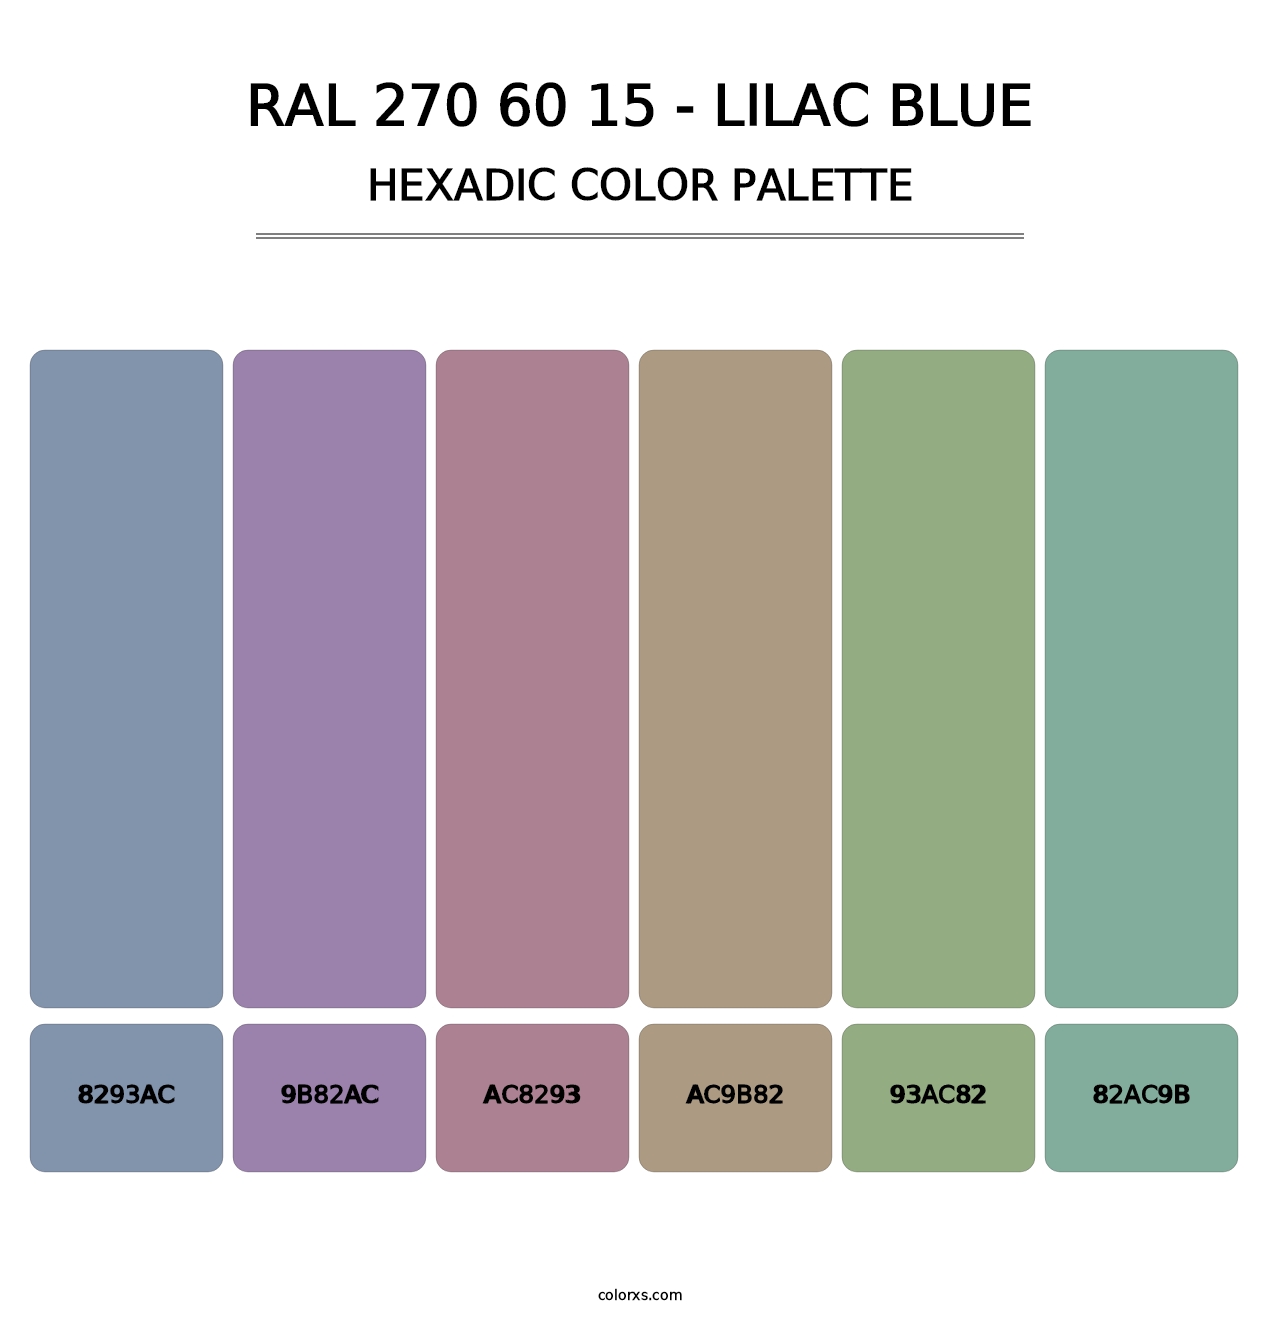 RAL 270 60 15 - Lilac Blue - Hexadic Color Palette